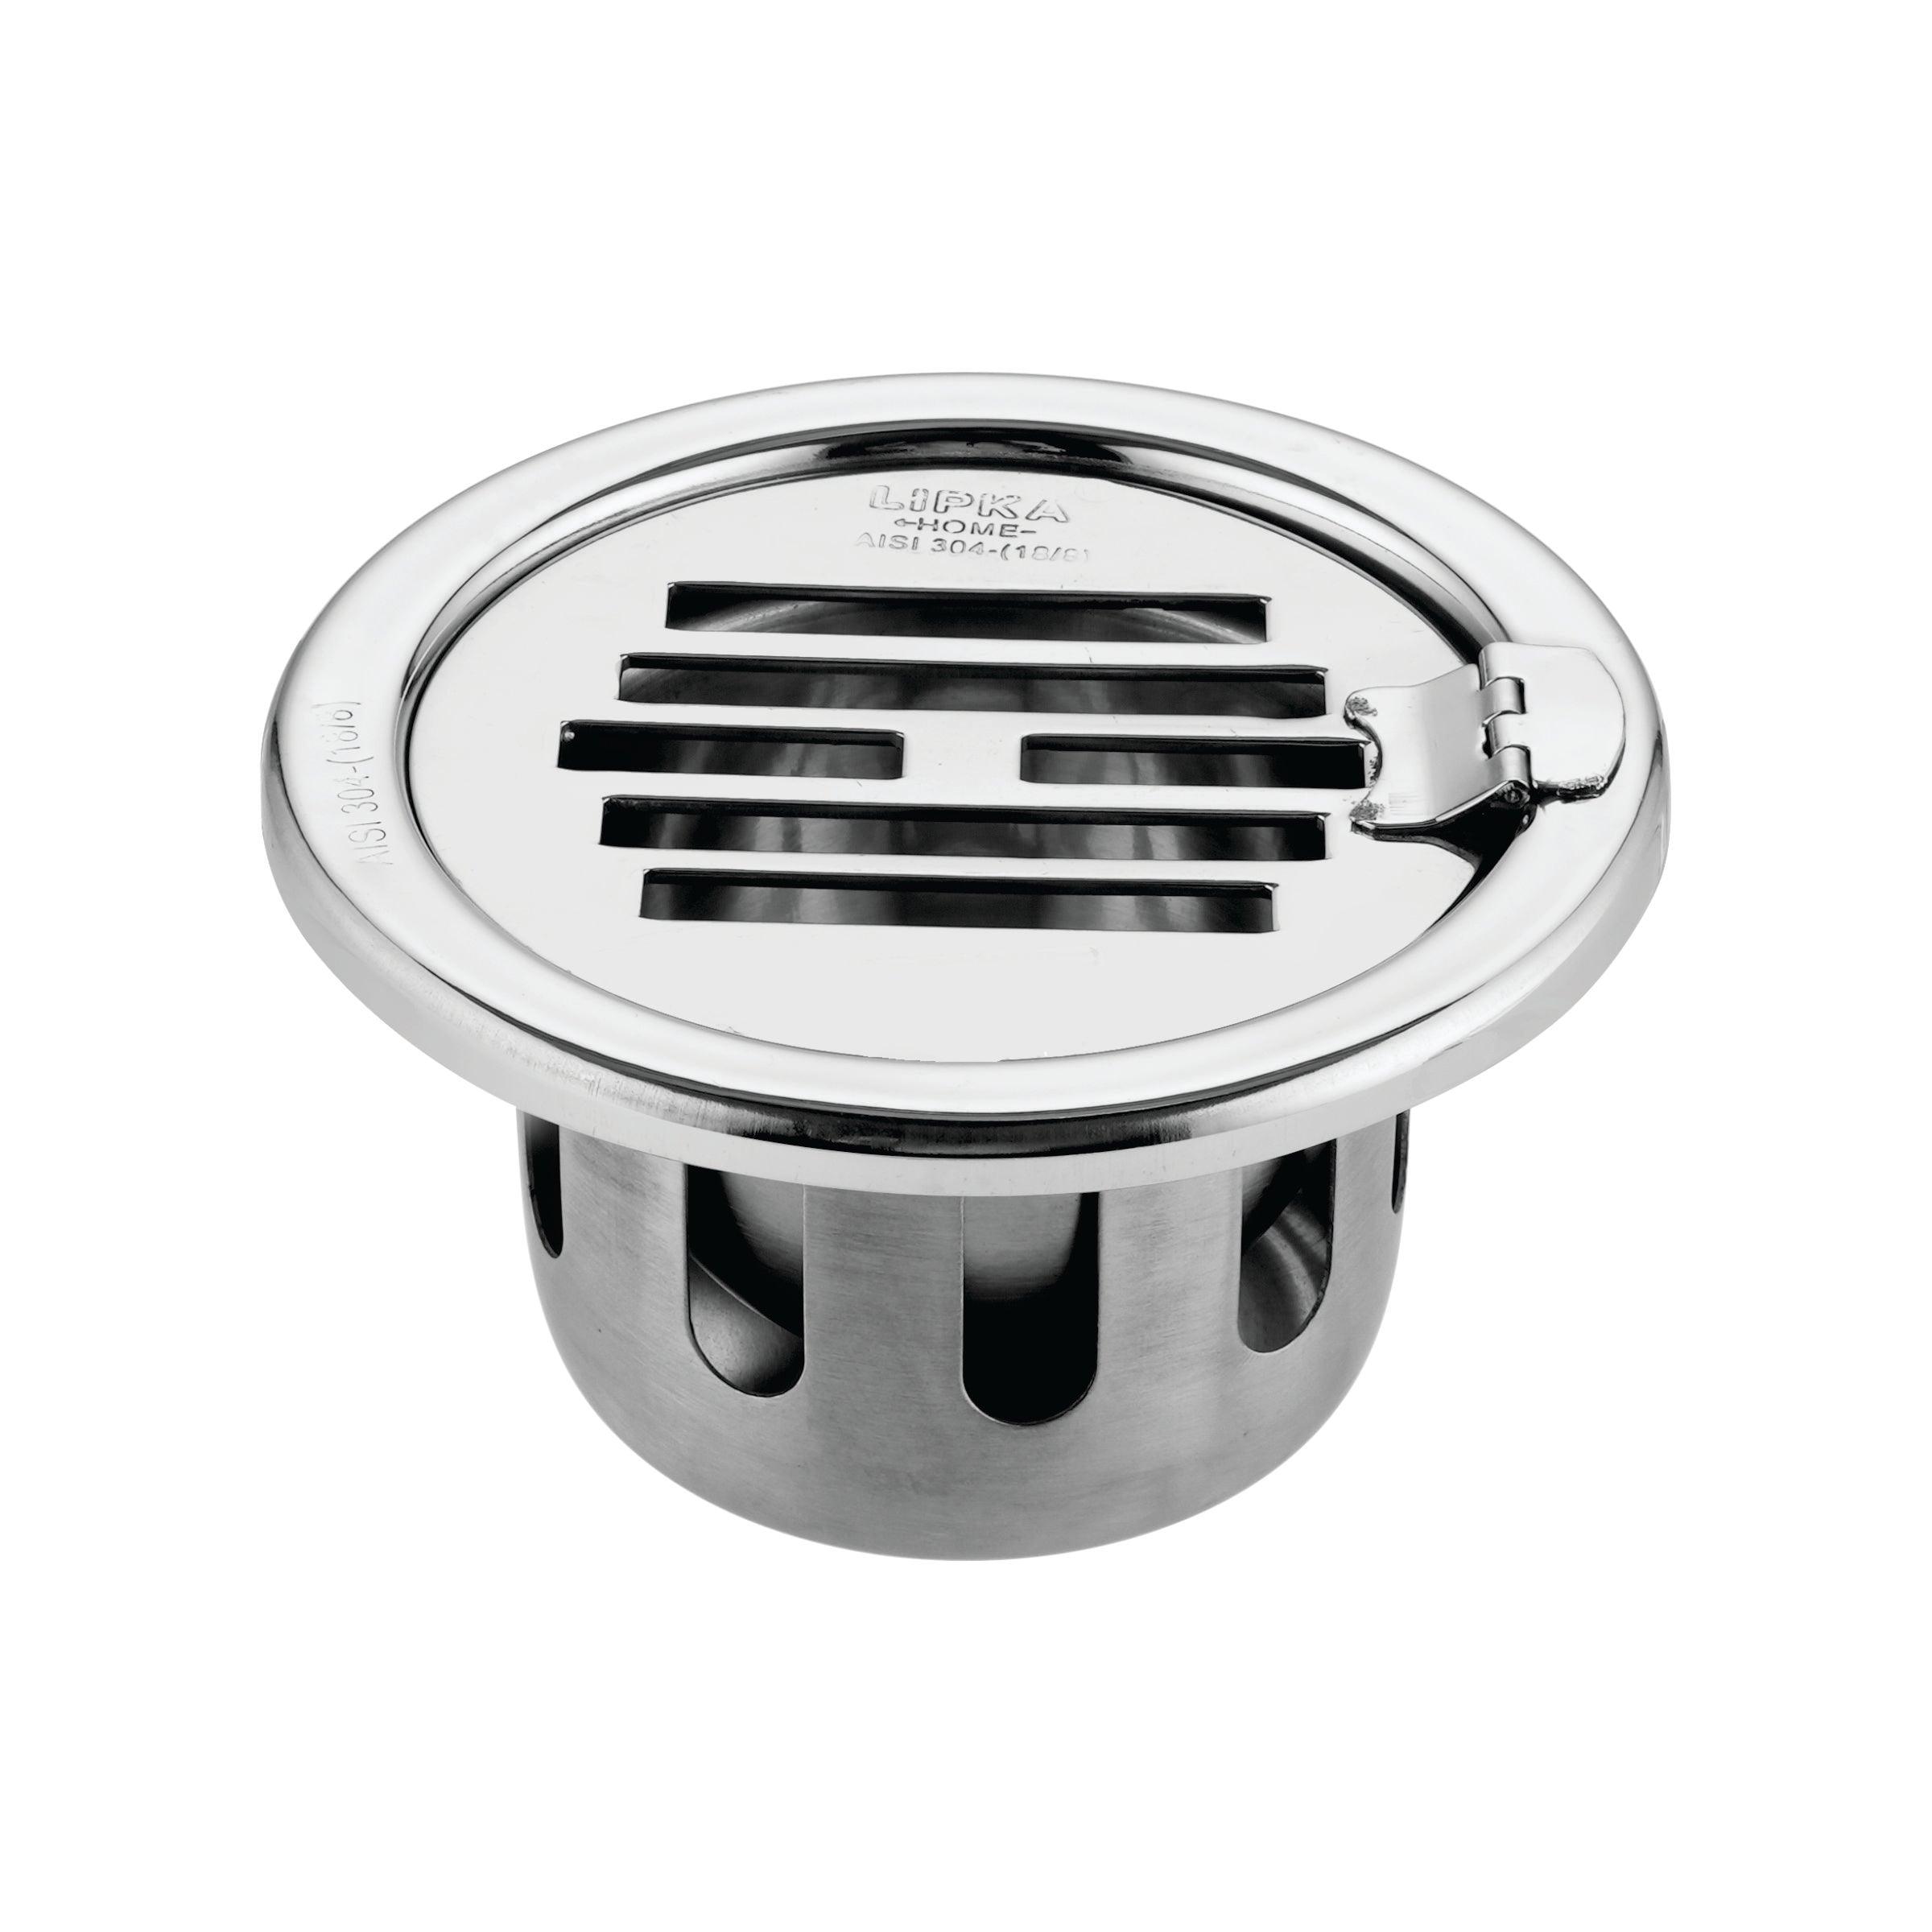 Golden Classic Jali Round Floor Drain (5 Inches) with Hinge and Cockroach Trap